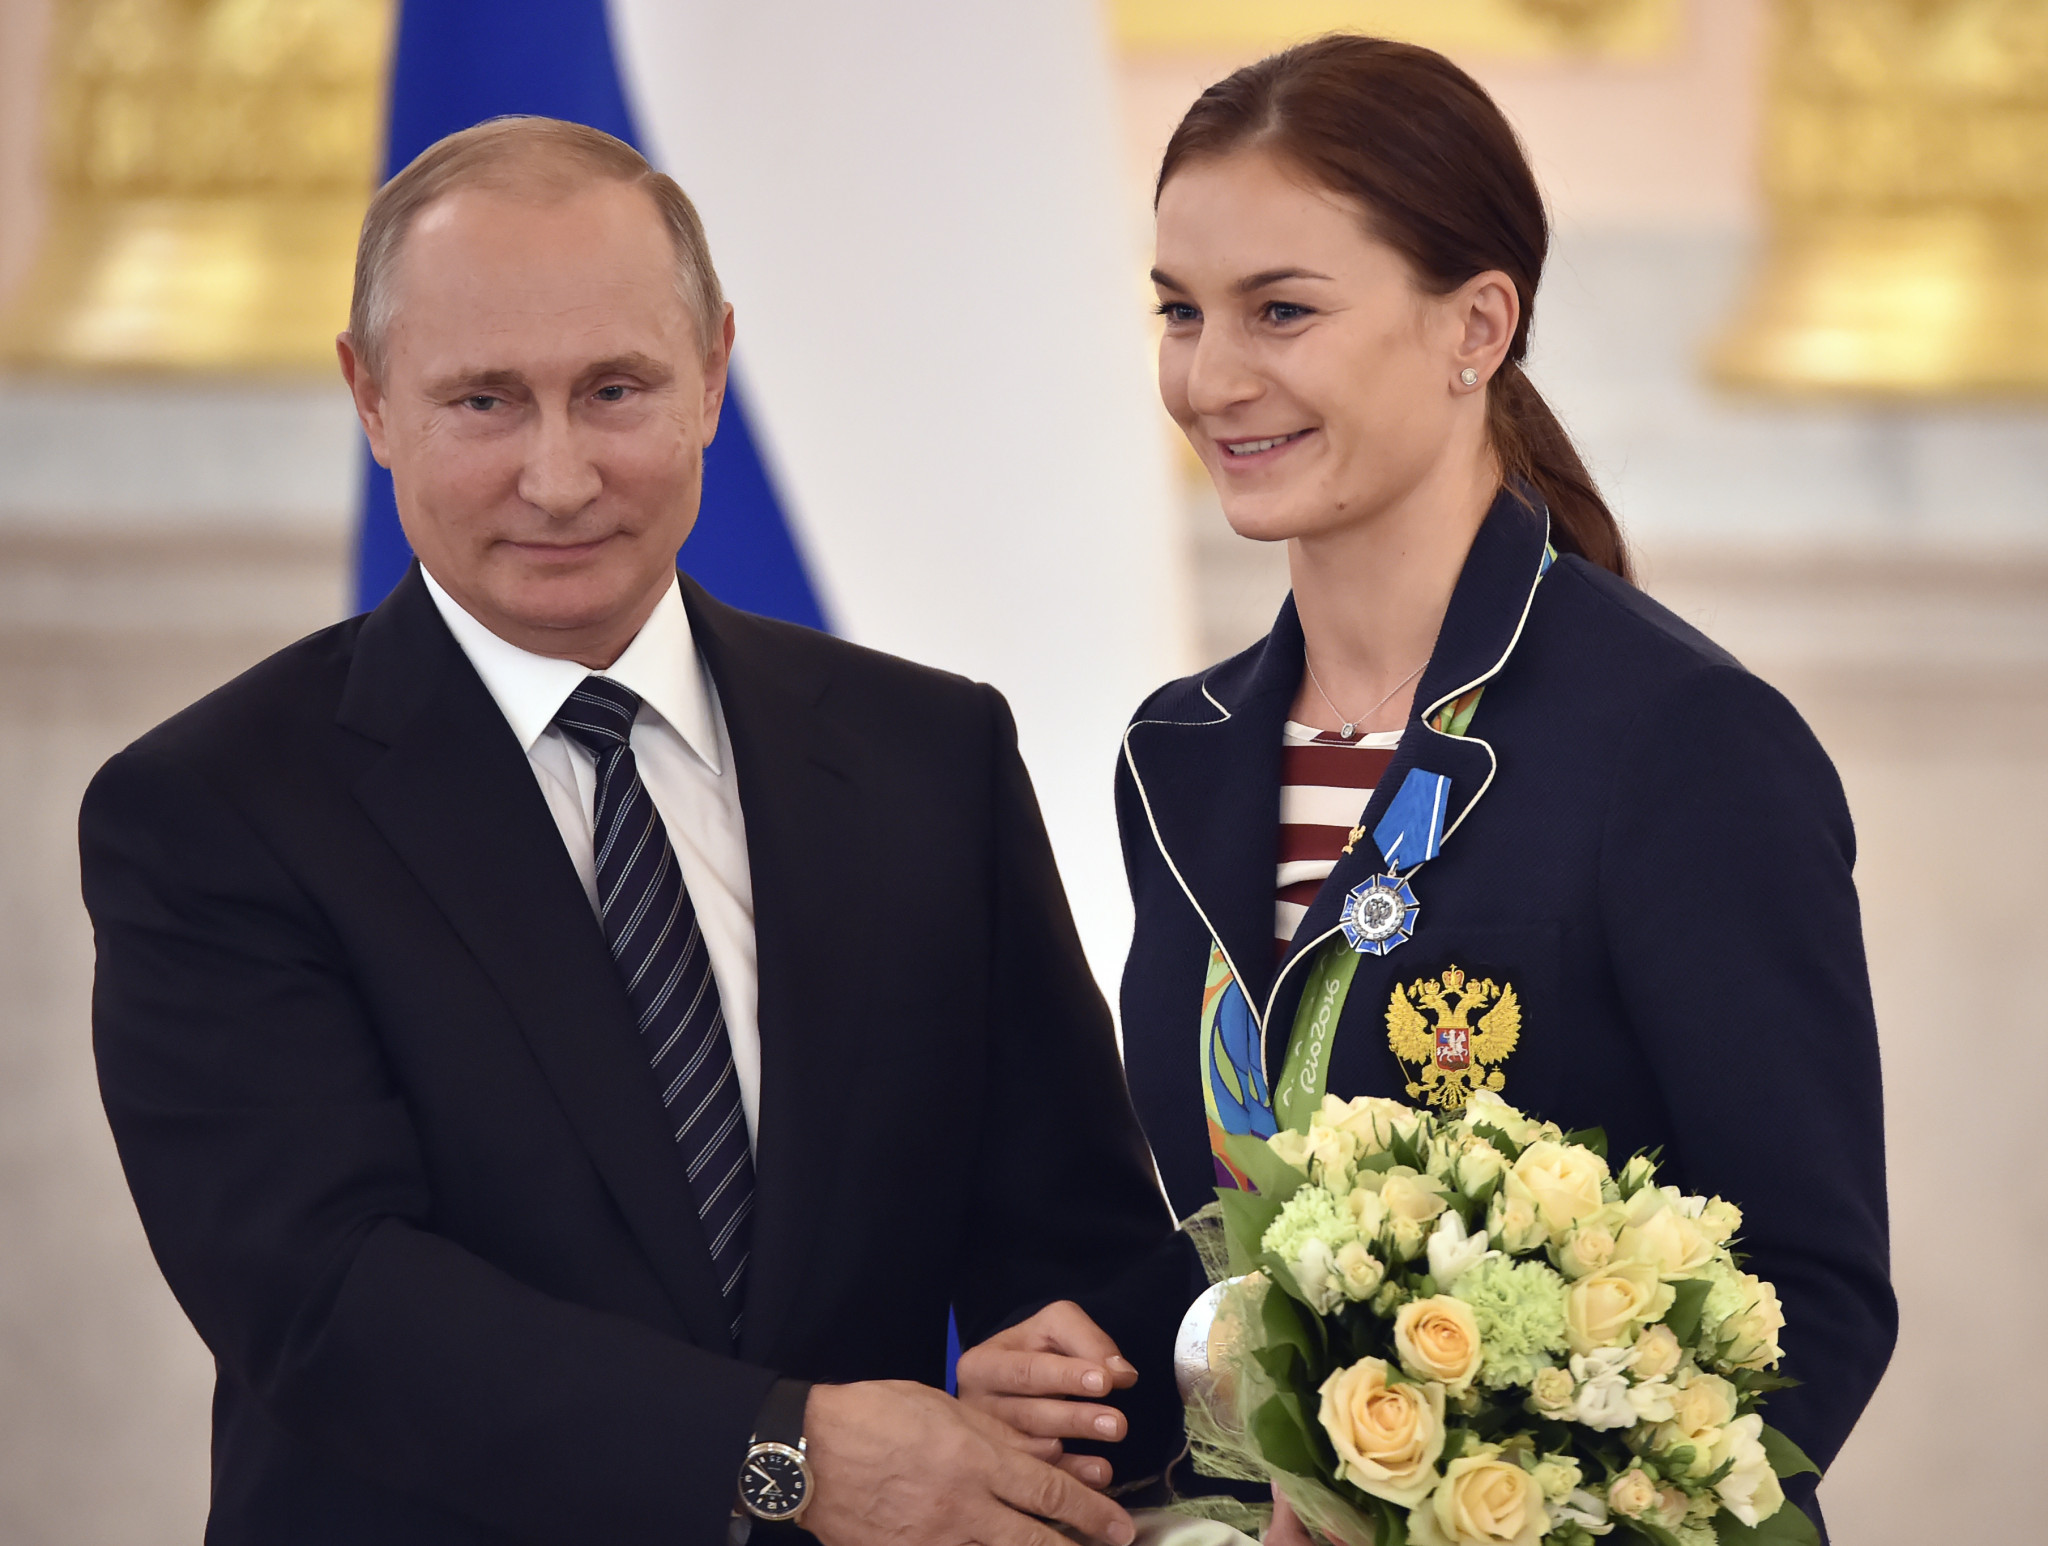 Sofya Velikaya, seen here with Vladimir Putin, says that all Russian athletes have announced plans to complete as neutral athletes under the Olympic flag at next year’s Winter Olympic’s in Pyeongchang ©Getty Images